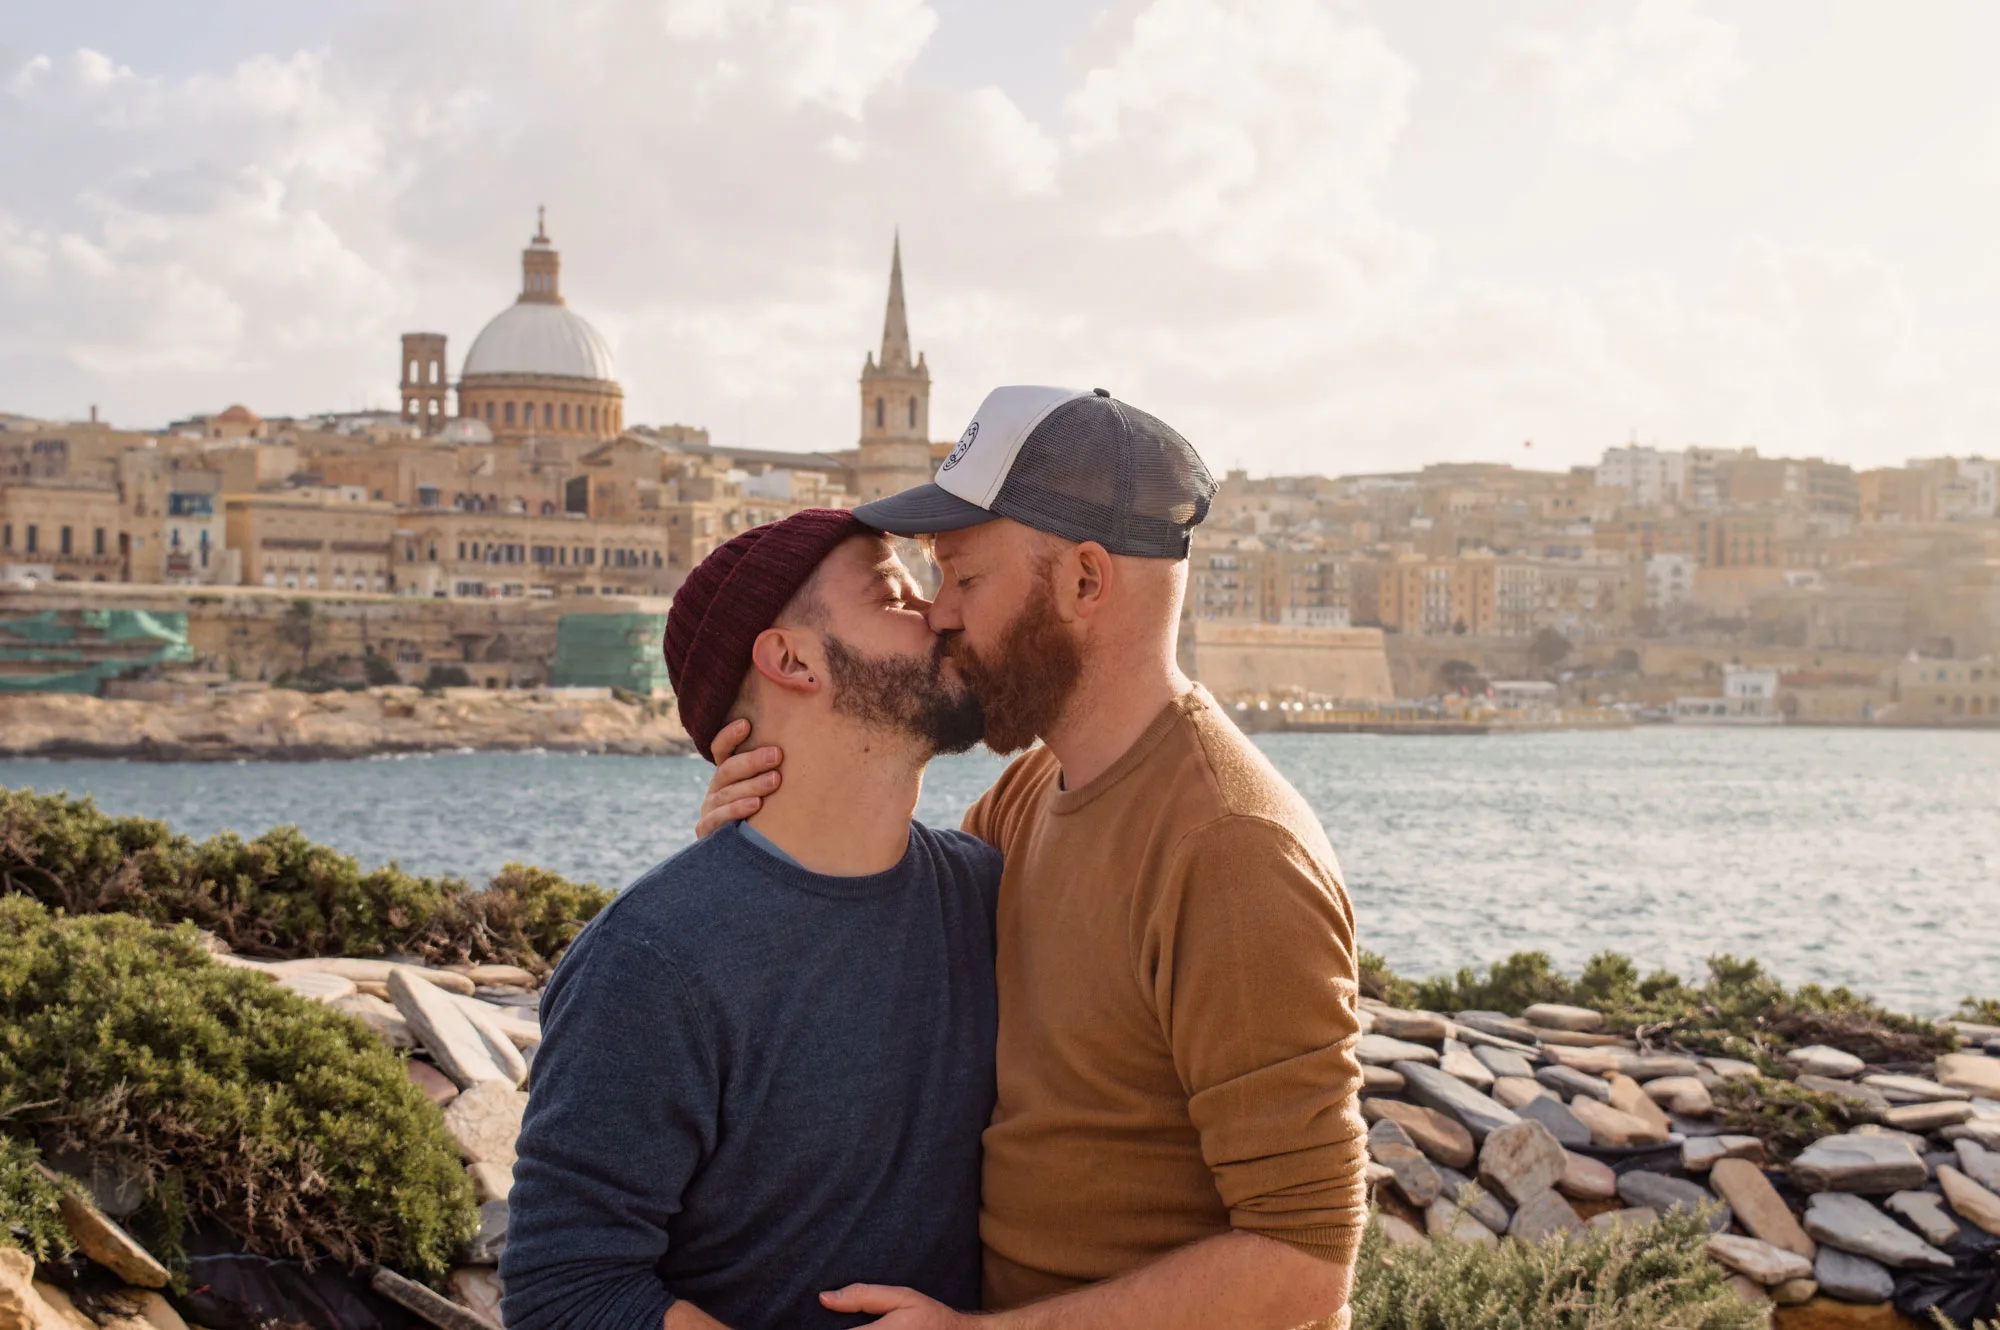 Happy on gaycation in the world's most LGBTQ+ friendly destination © Coupleofmen.com